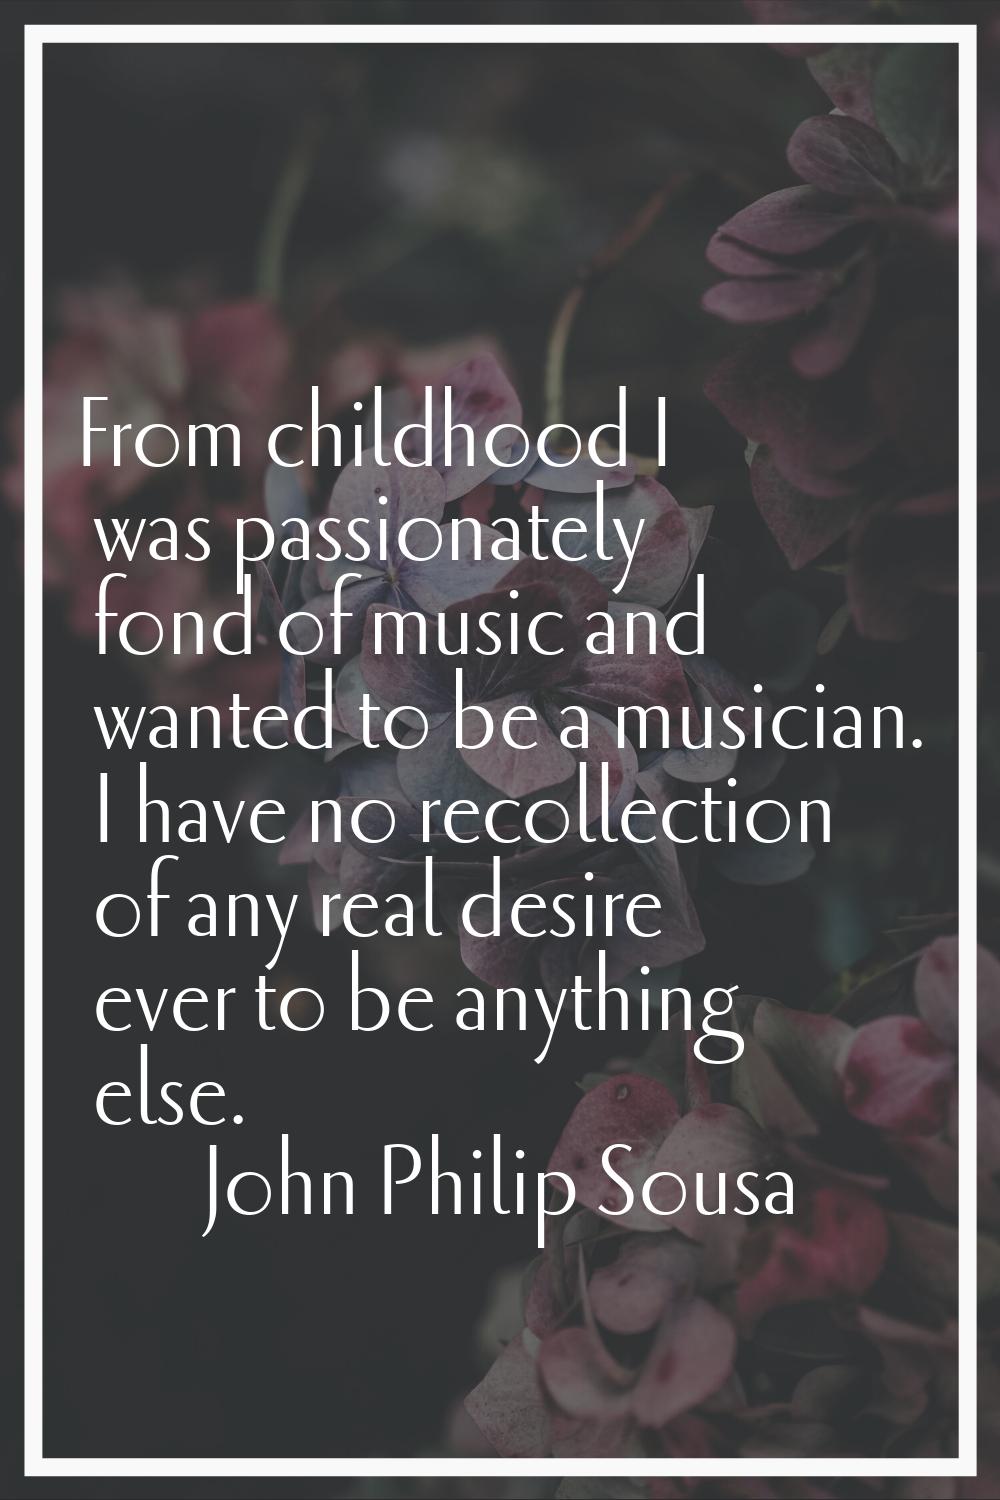 From childhood I was passionately fond of music and wanted to be a musician. I have no recollection